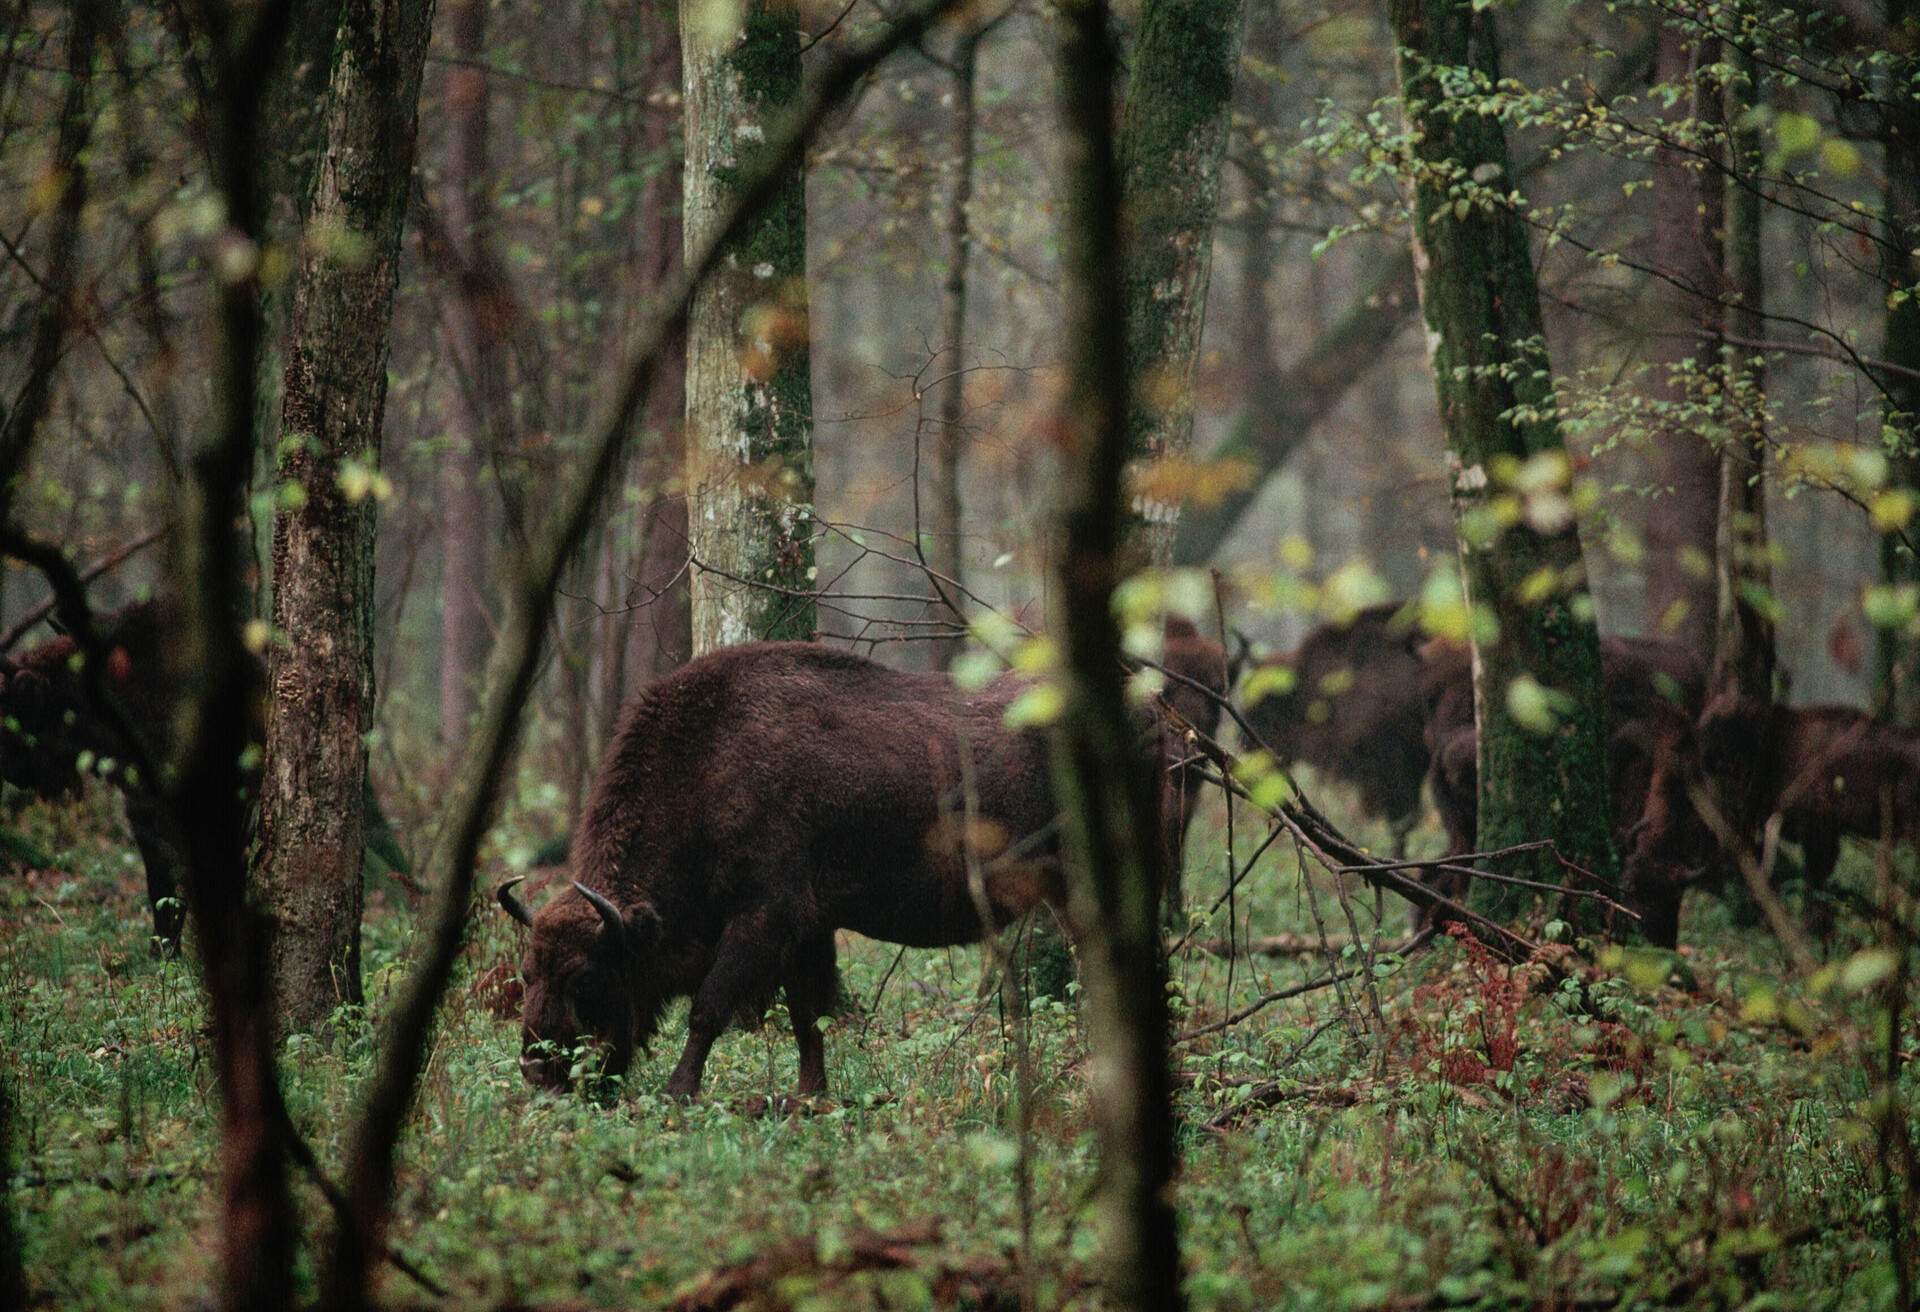 European bison from a small protected herd roam the Bialowieza Forest of eastern Poland. Once near extinction, the bison were reintroduced to the forest by scientists. This is the last wild herd in Europe.